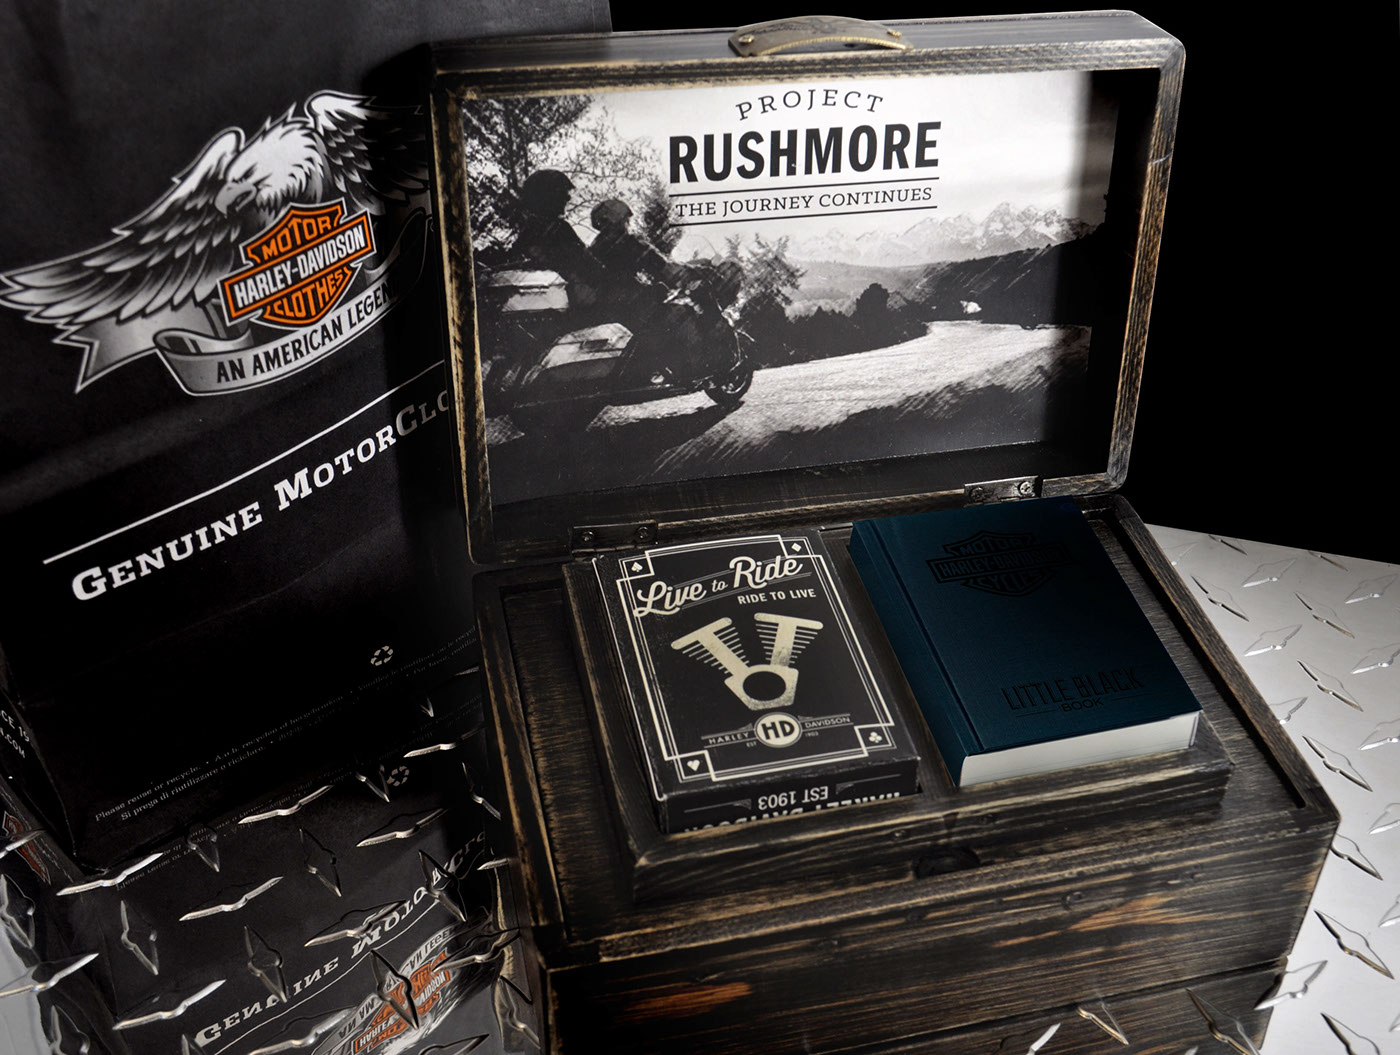 Harley Davidson Project Rushmore Playing Cards poker set publication book Layout handmade